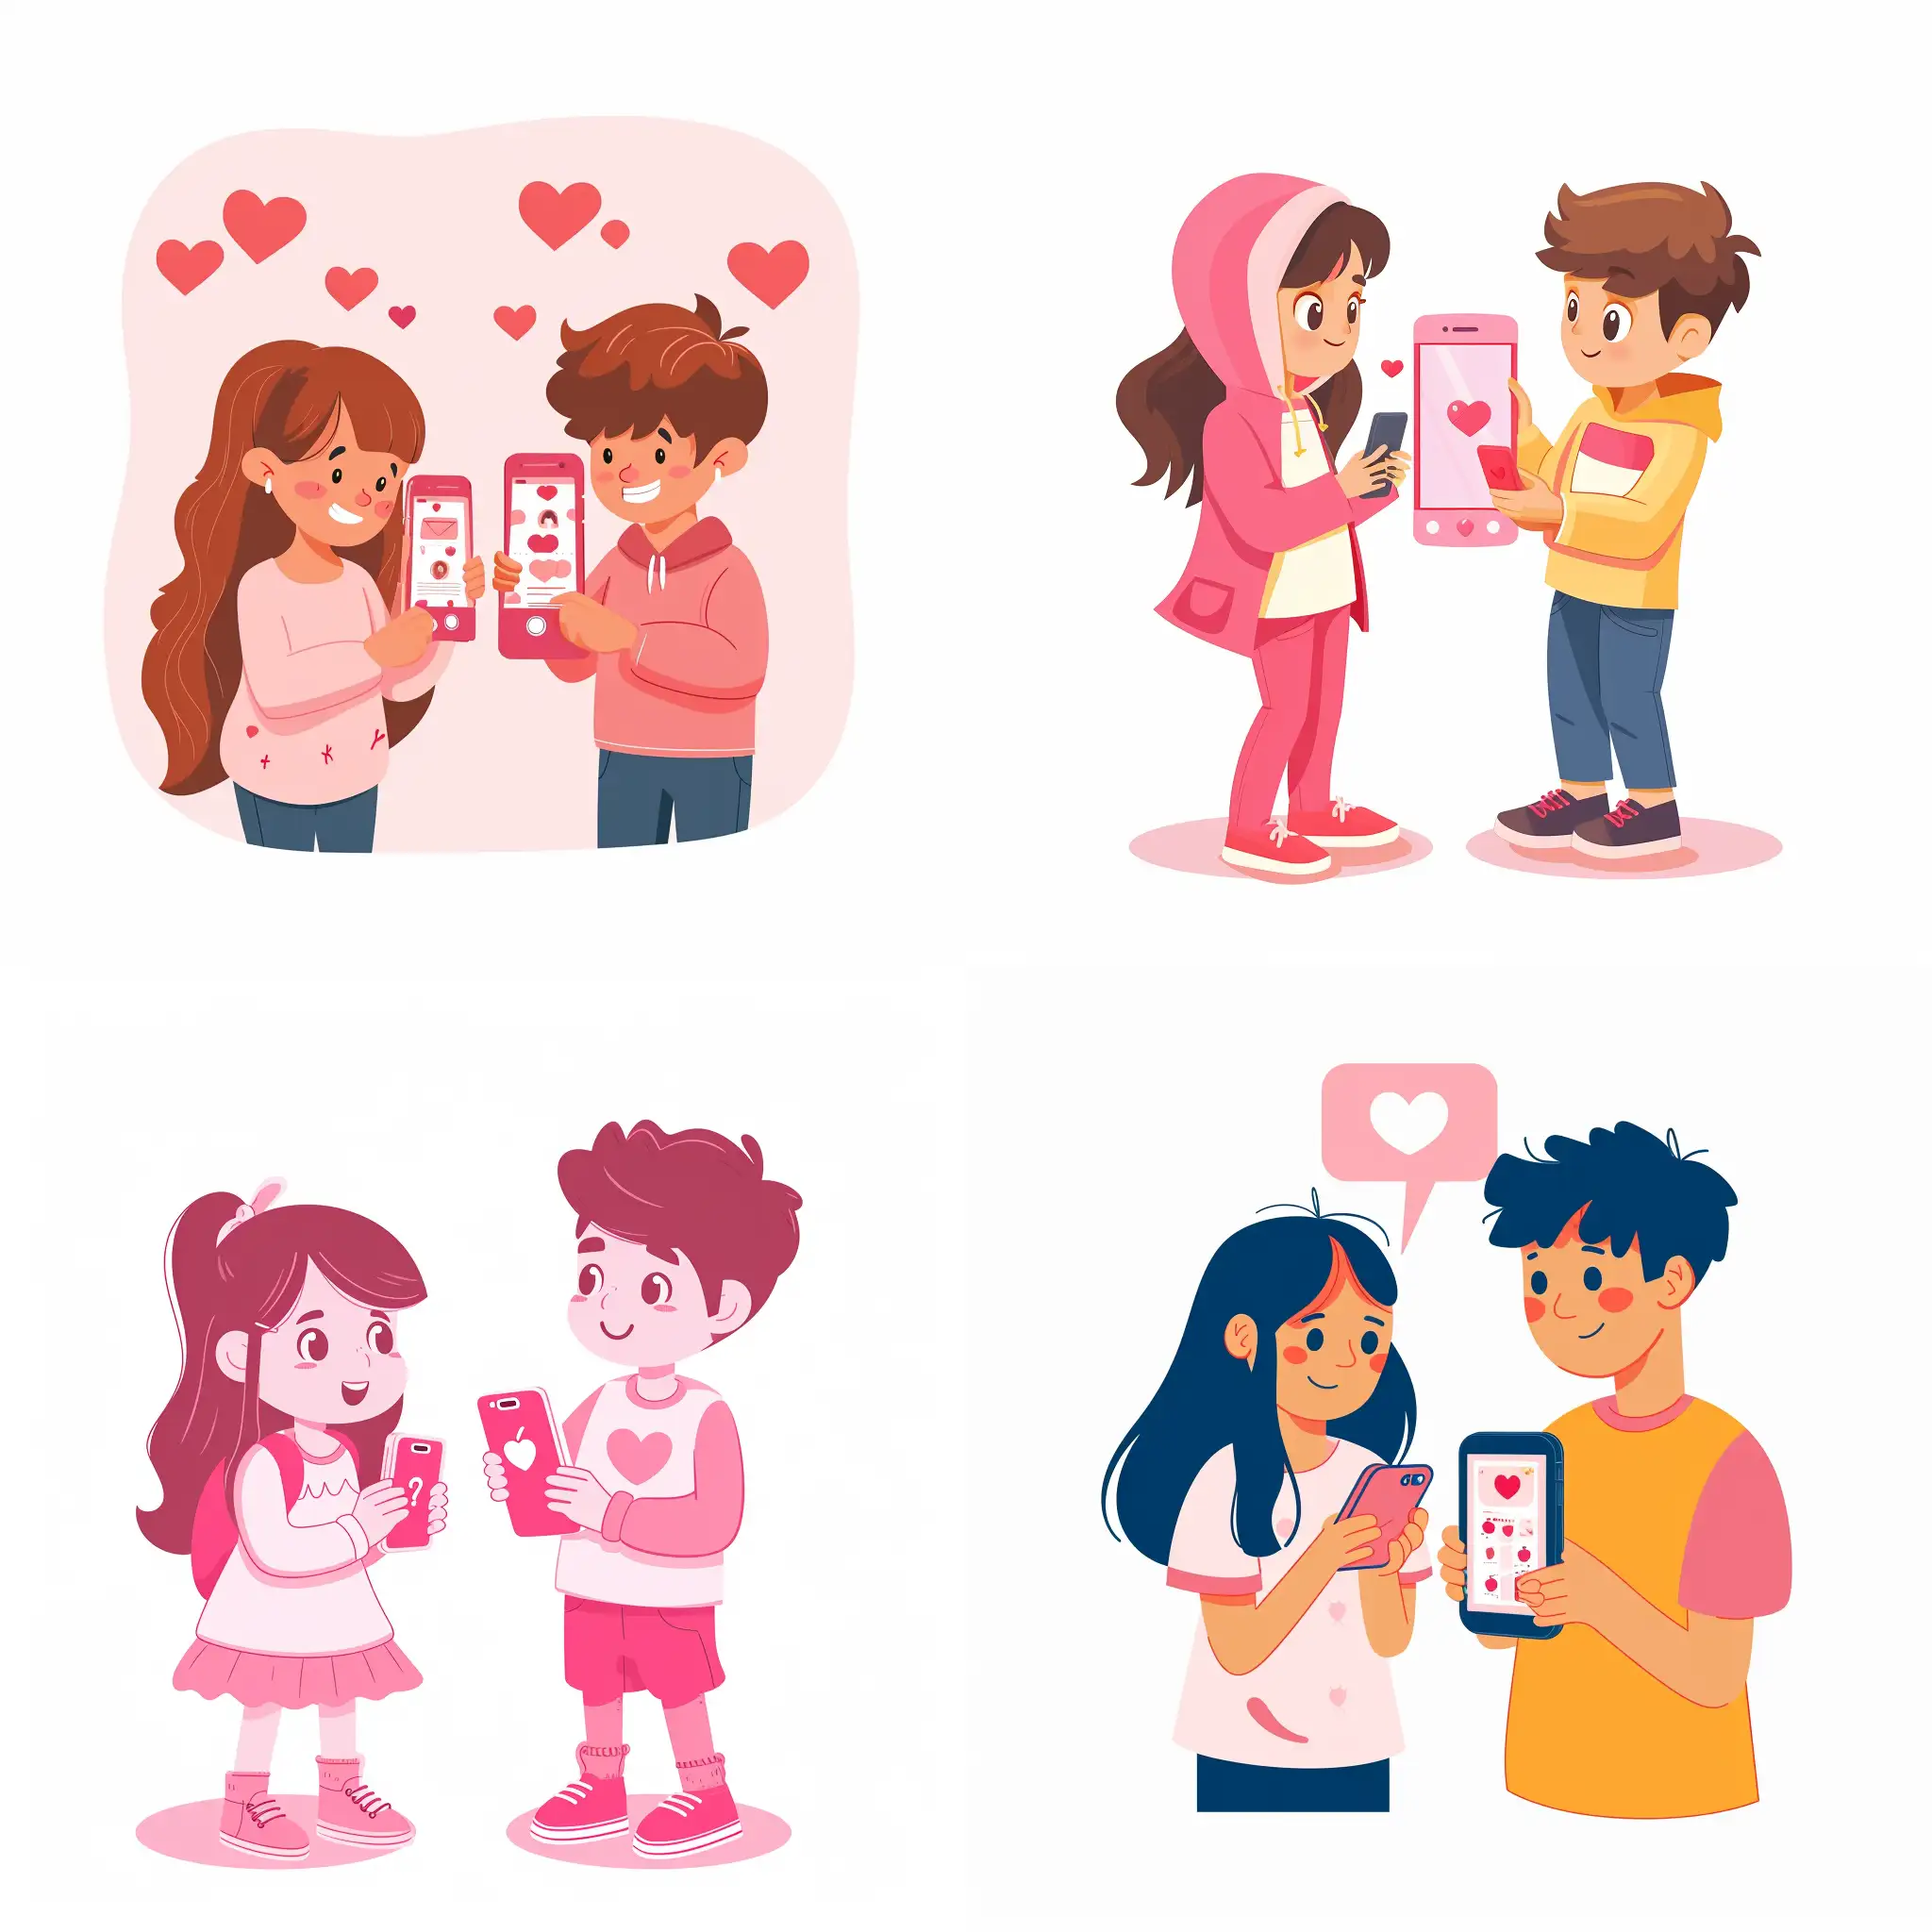 Youthful-Connection-Teenagers-Using-Online-Friend-Matching-App-in-Vibrant-Pink-Vector-Art